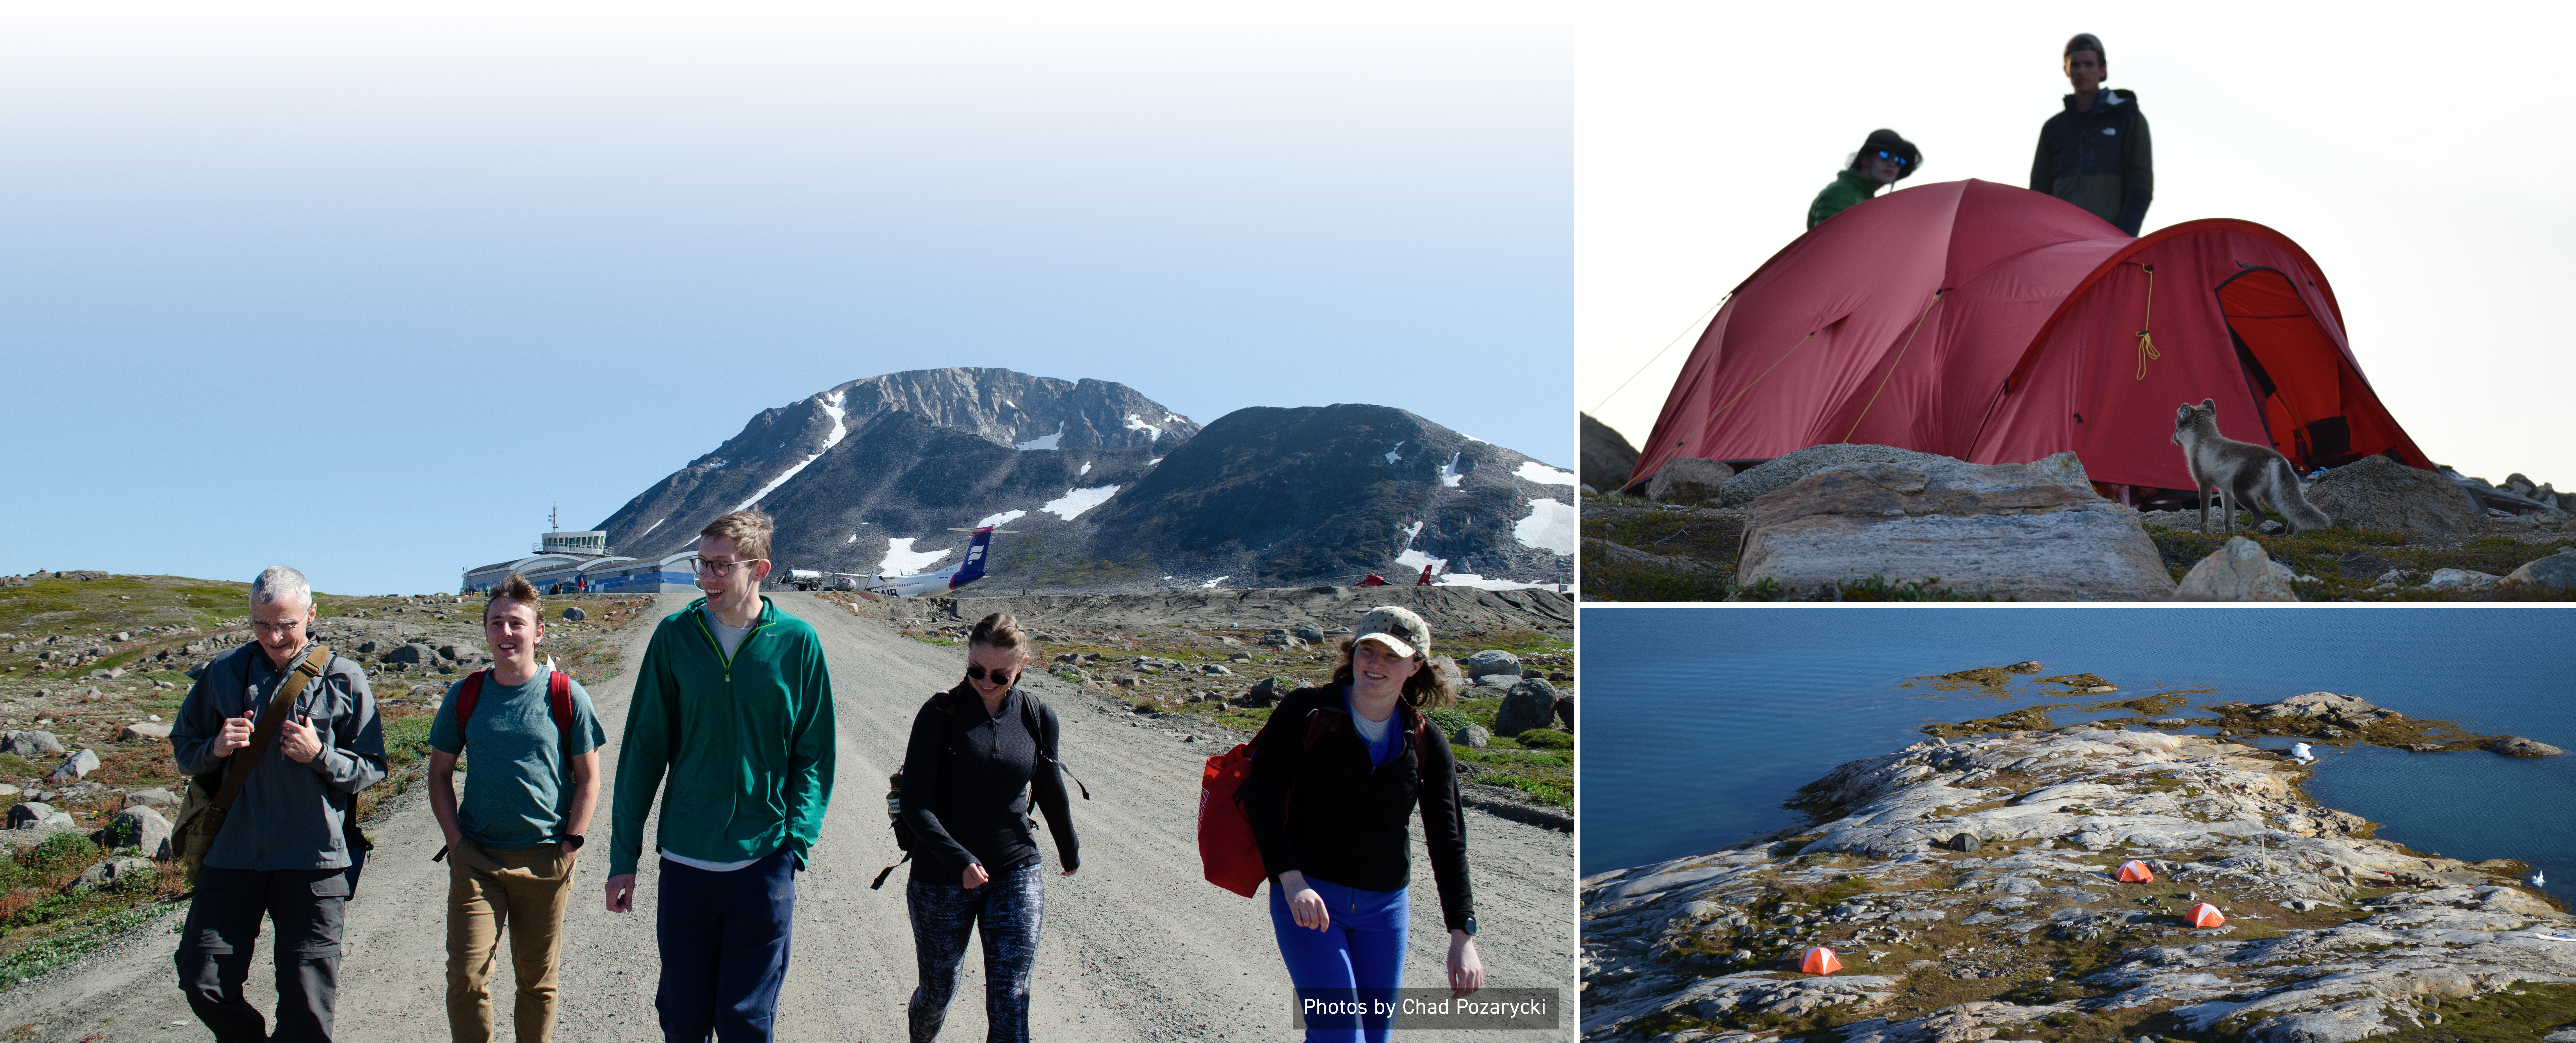 Three images, on the left is a picture of the team walking from the airport. On the top right is an image of the tent and a small fox. On the bottom right is an image of the campsite from up above.